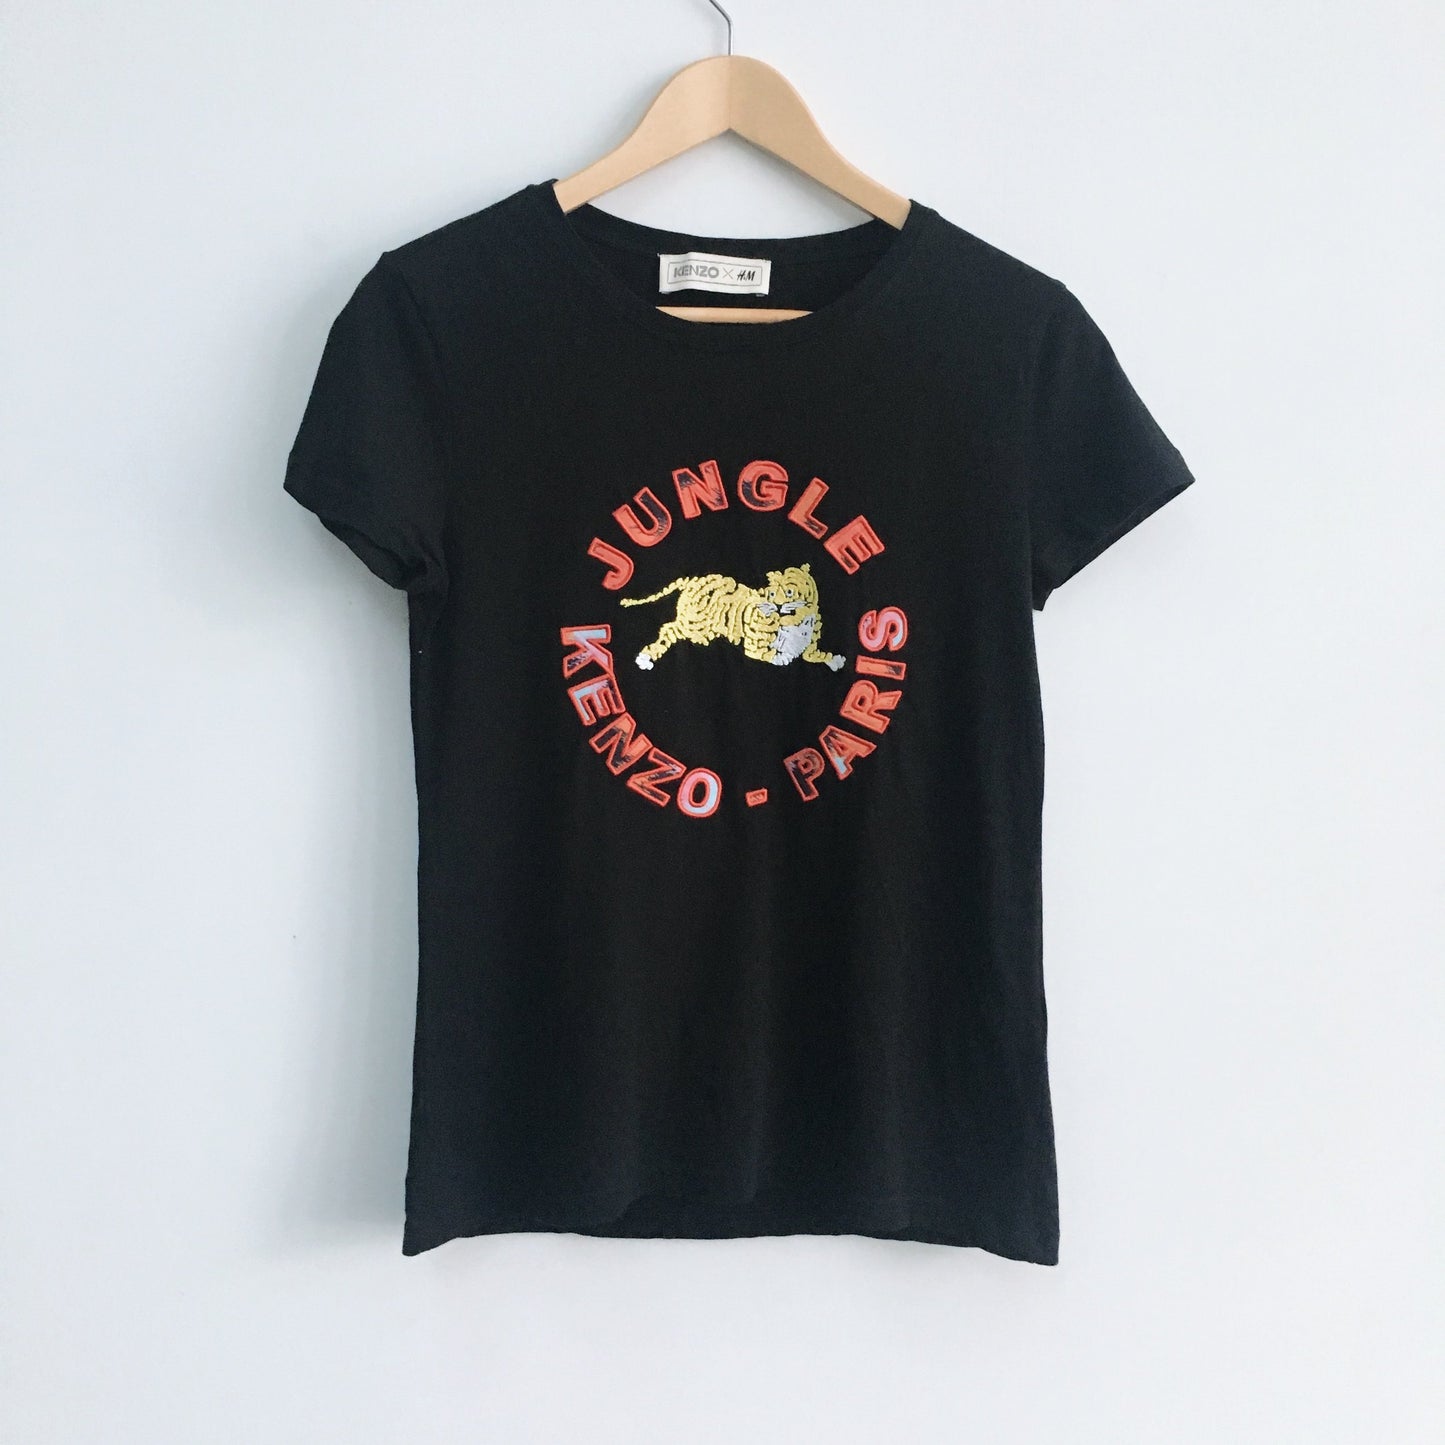 Kenzo for H&amp;M t-shirt - Size Small